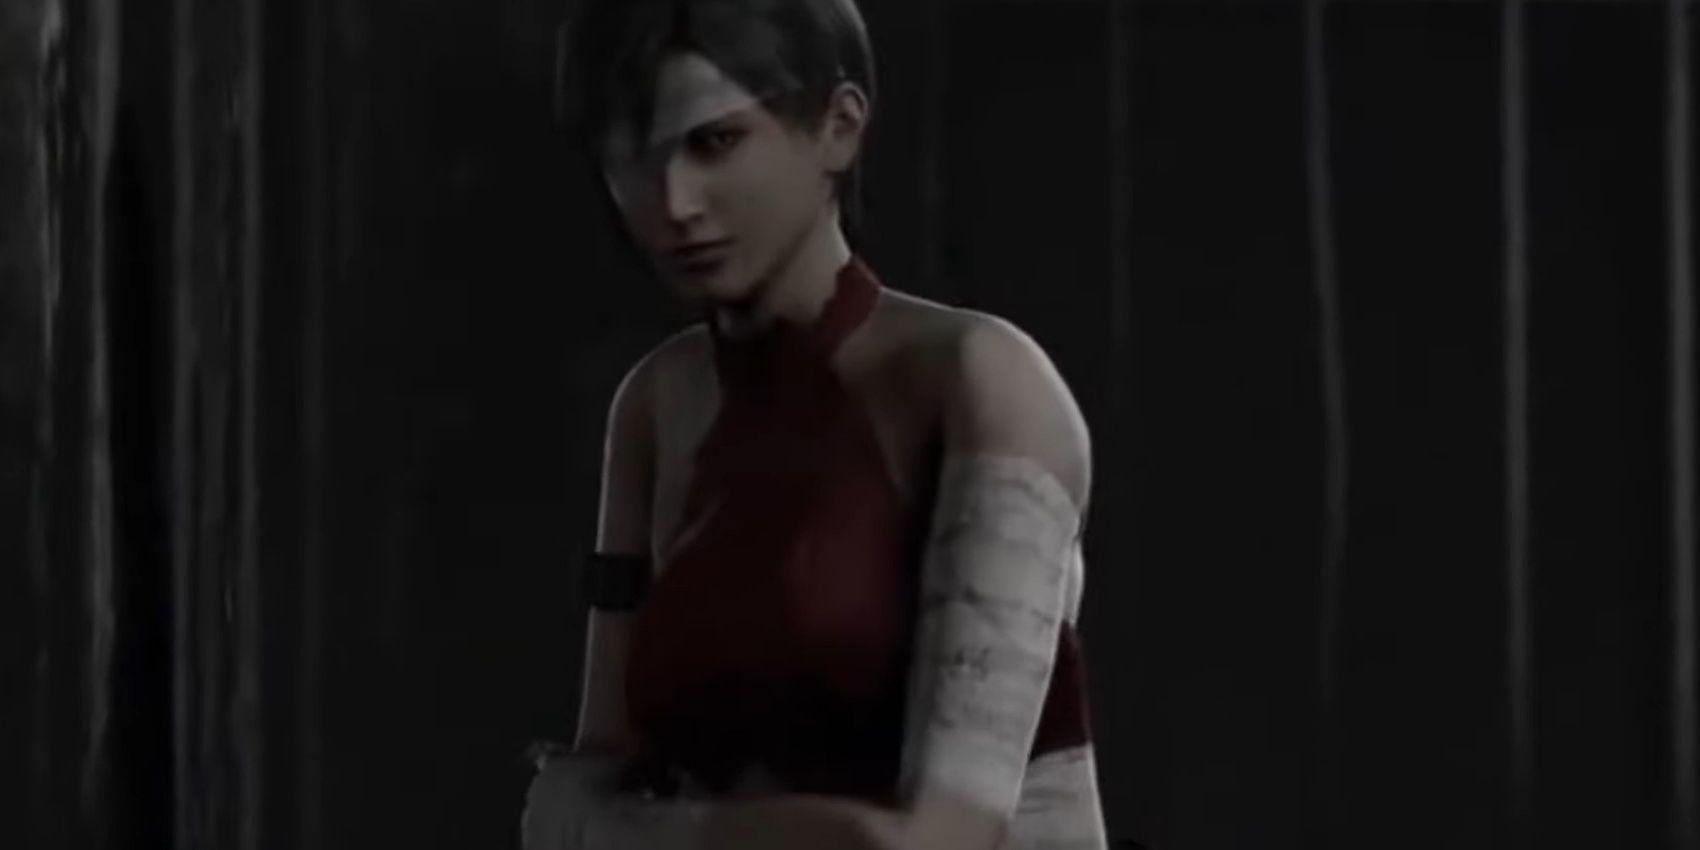 Ada injured after the events of Resident Evil 2.